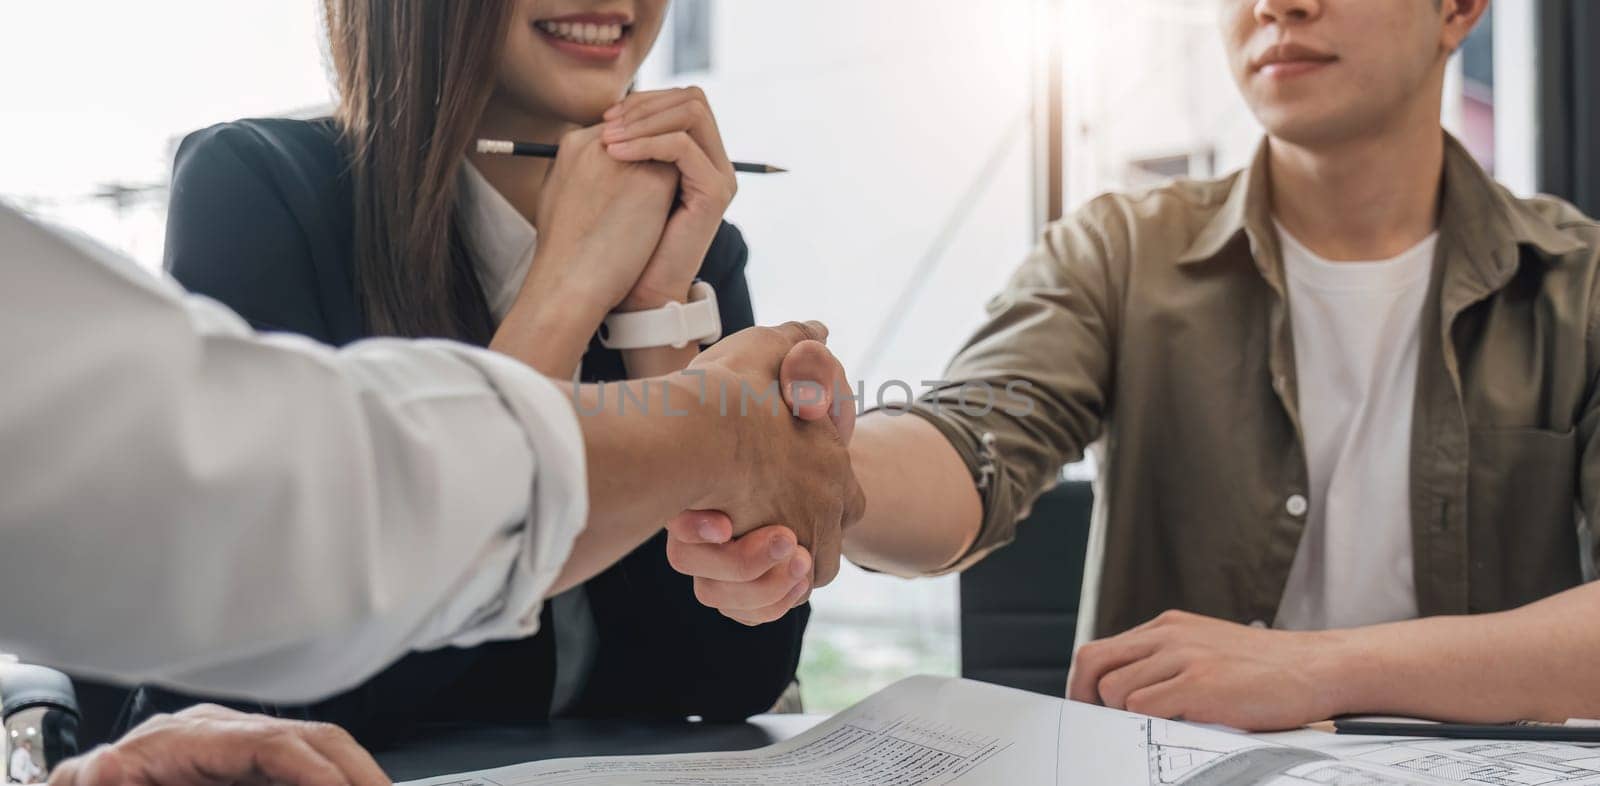 Success deal, Meeting and greeting for project of partner. Construction engineering, architect worker team or partnership hands shaking, handshake after agreement in office site, collaboration concept..